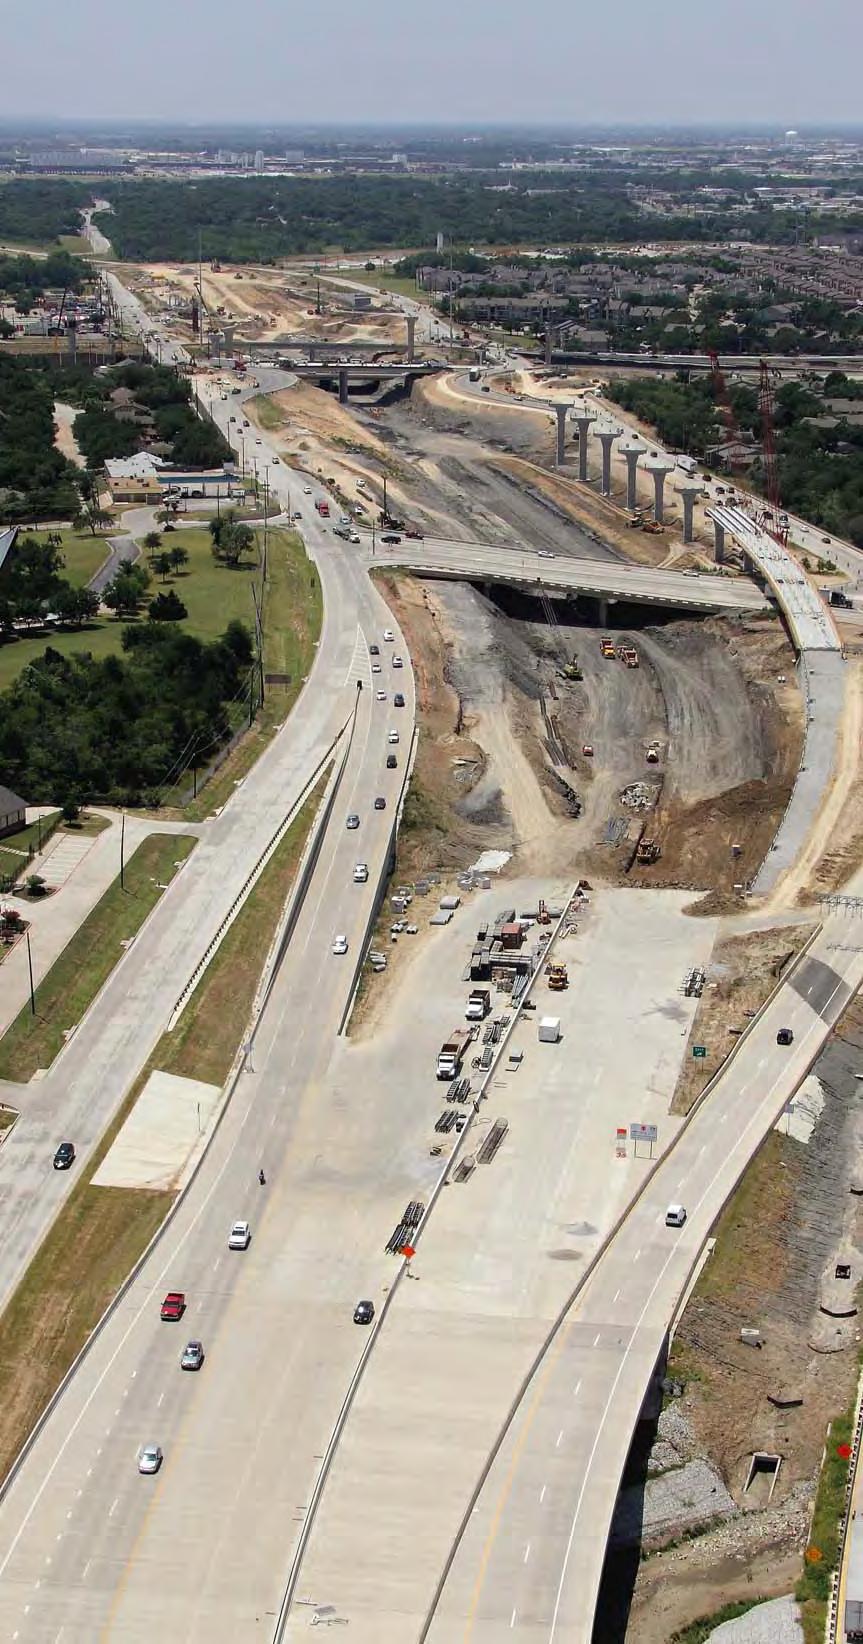 Case Study: AECOM Dallas, Texas, United States The State Highway 161 Phase 4 project in the Dallas/Fort Worth metroplex is a four-lane, 6.